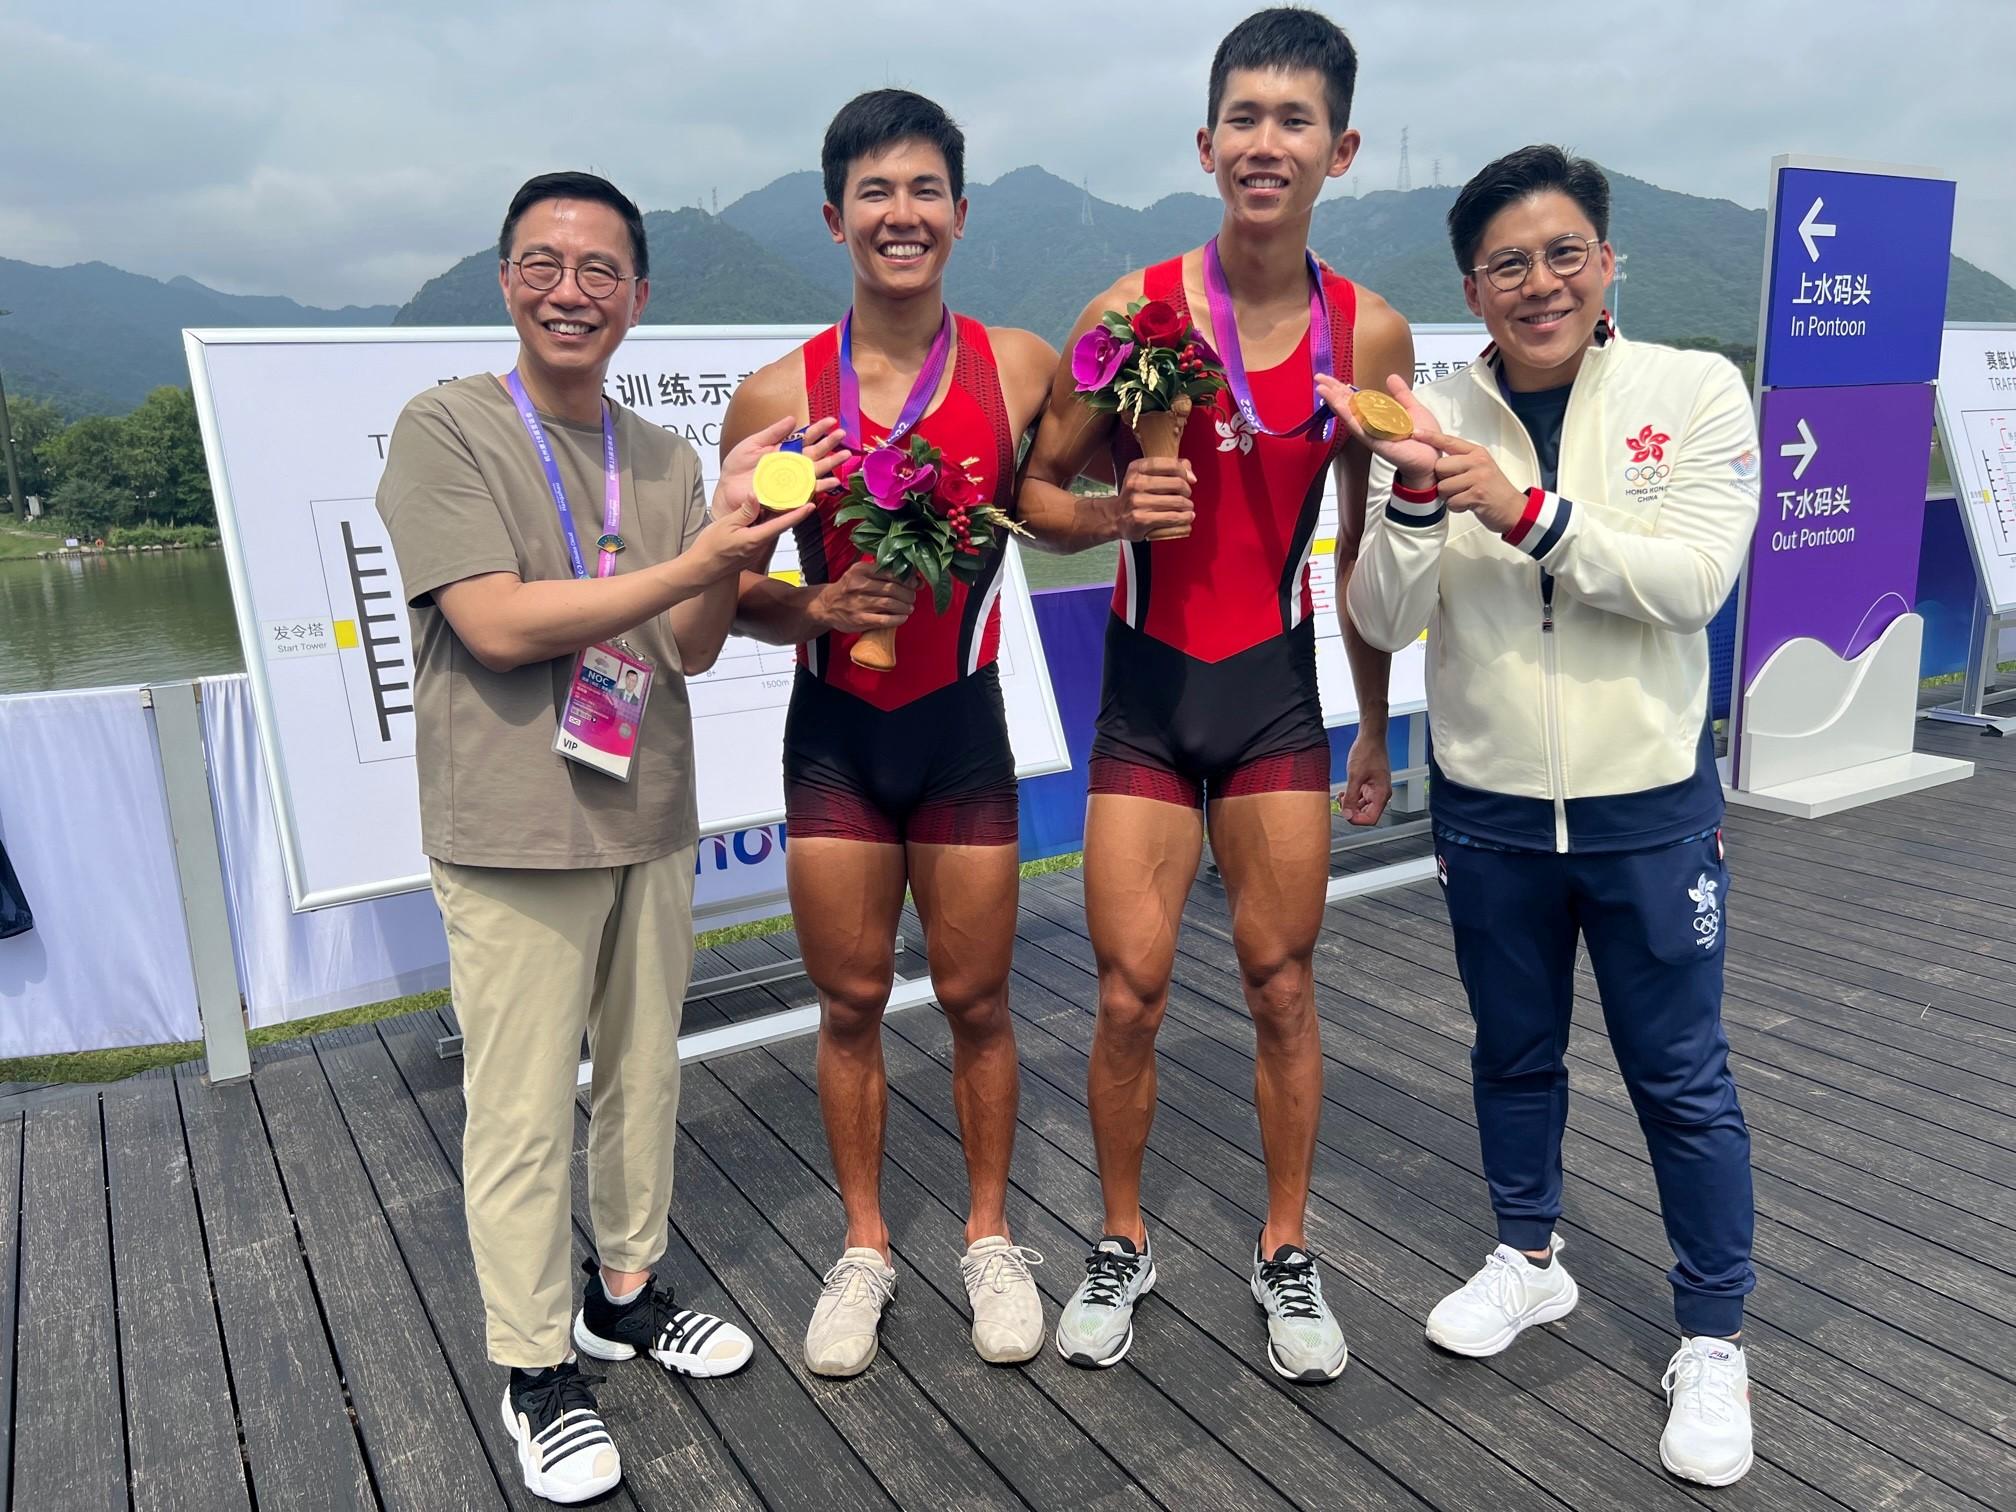 The Secretary for Culture, Sports and Tourism, Mr Kevin Yeung (first left), today (September 24) congratulated rowing athletes Lam San-tung (second left) and Wong Wai-chun (second right) on winning a gold medal in Rowing Men's Pair at the 19th Asian Games Hangzhou (Asian Games). This is the first gold medal won by the Hong Kong, China Delegation in the Hangzhou Asian Games this year.